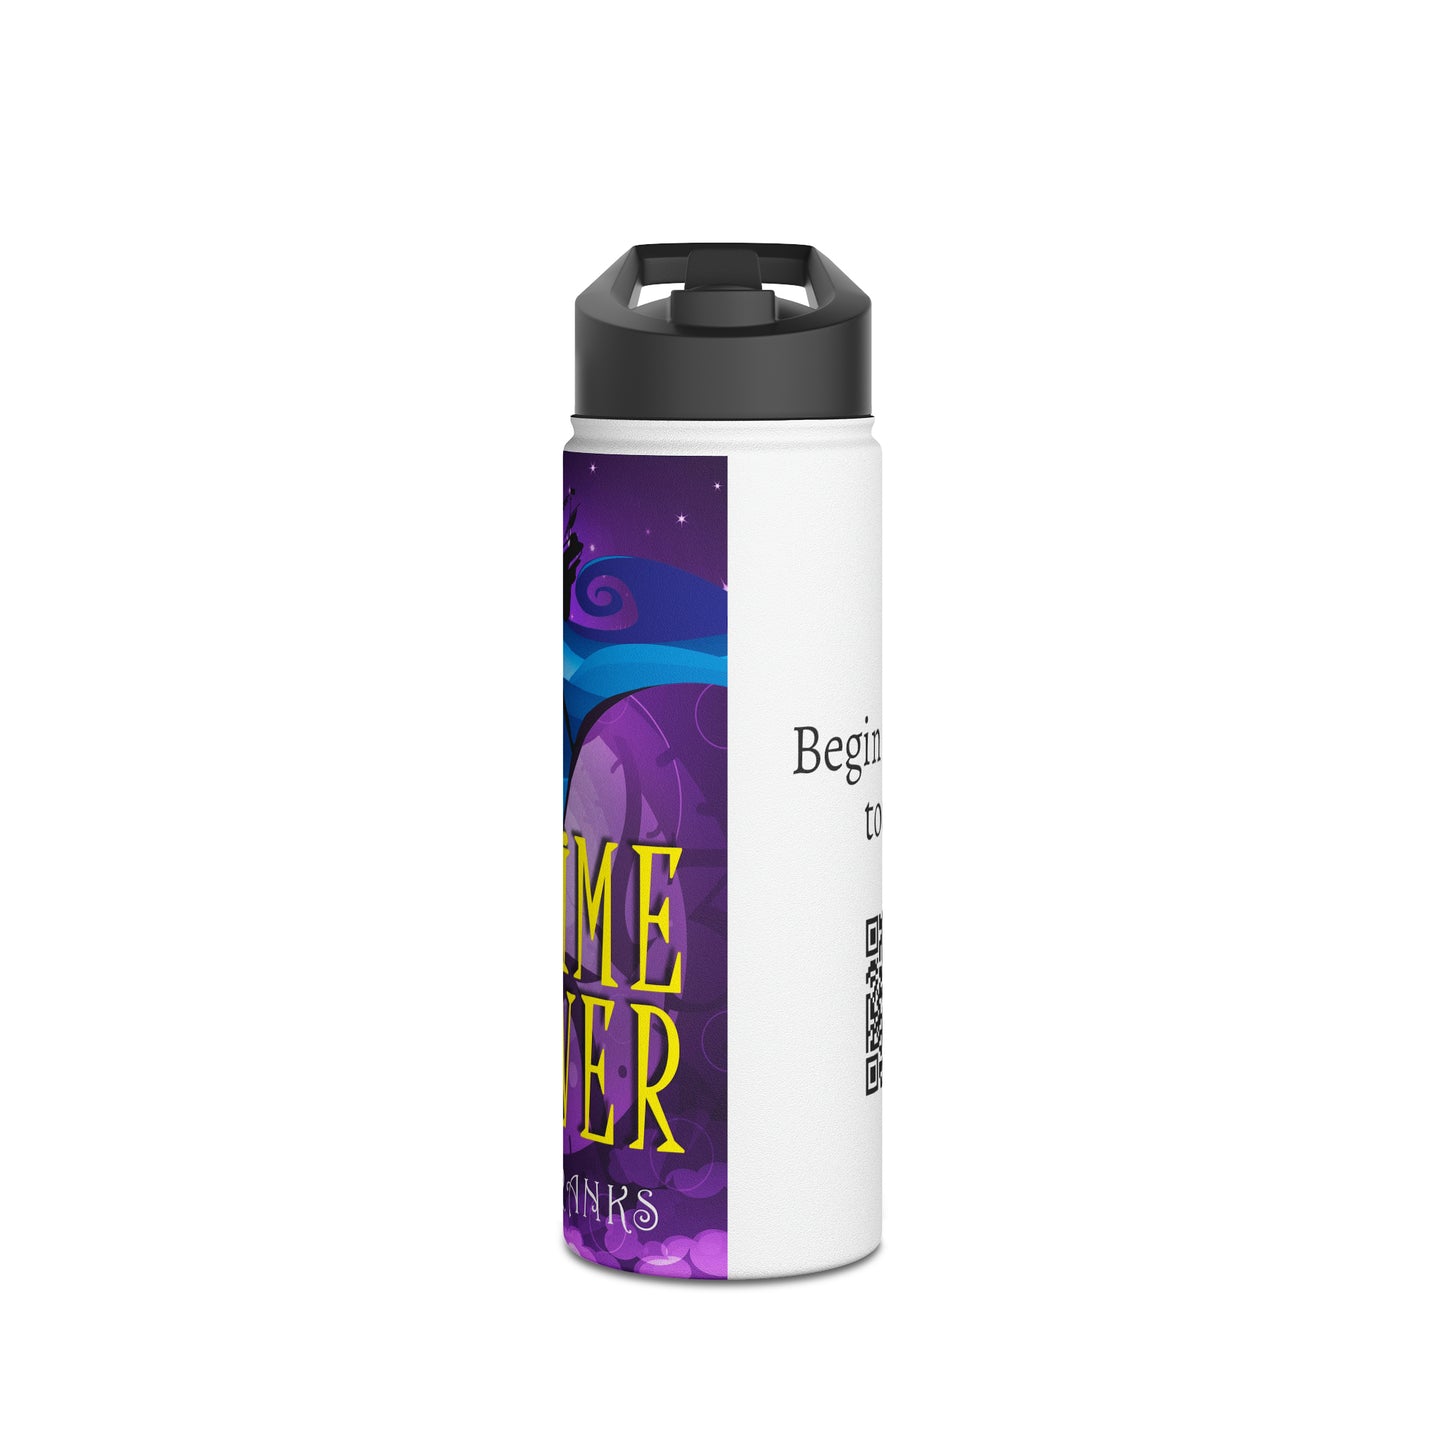 The Time Driver - Stainless Steel Water Bottle